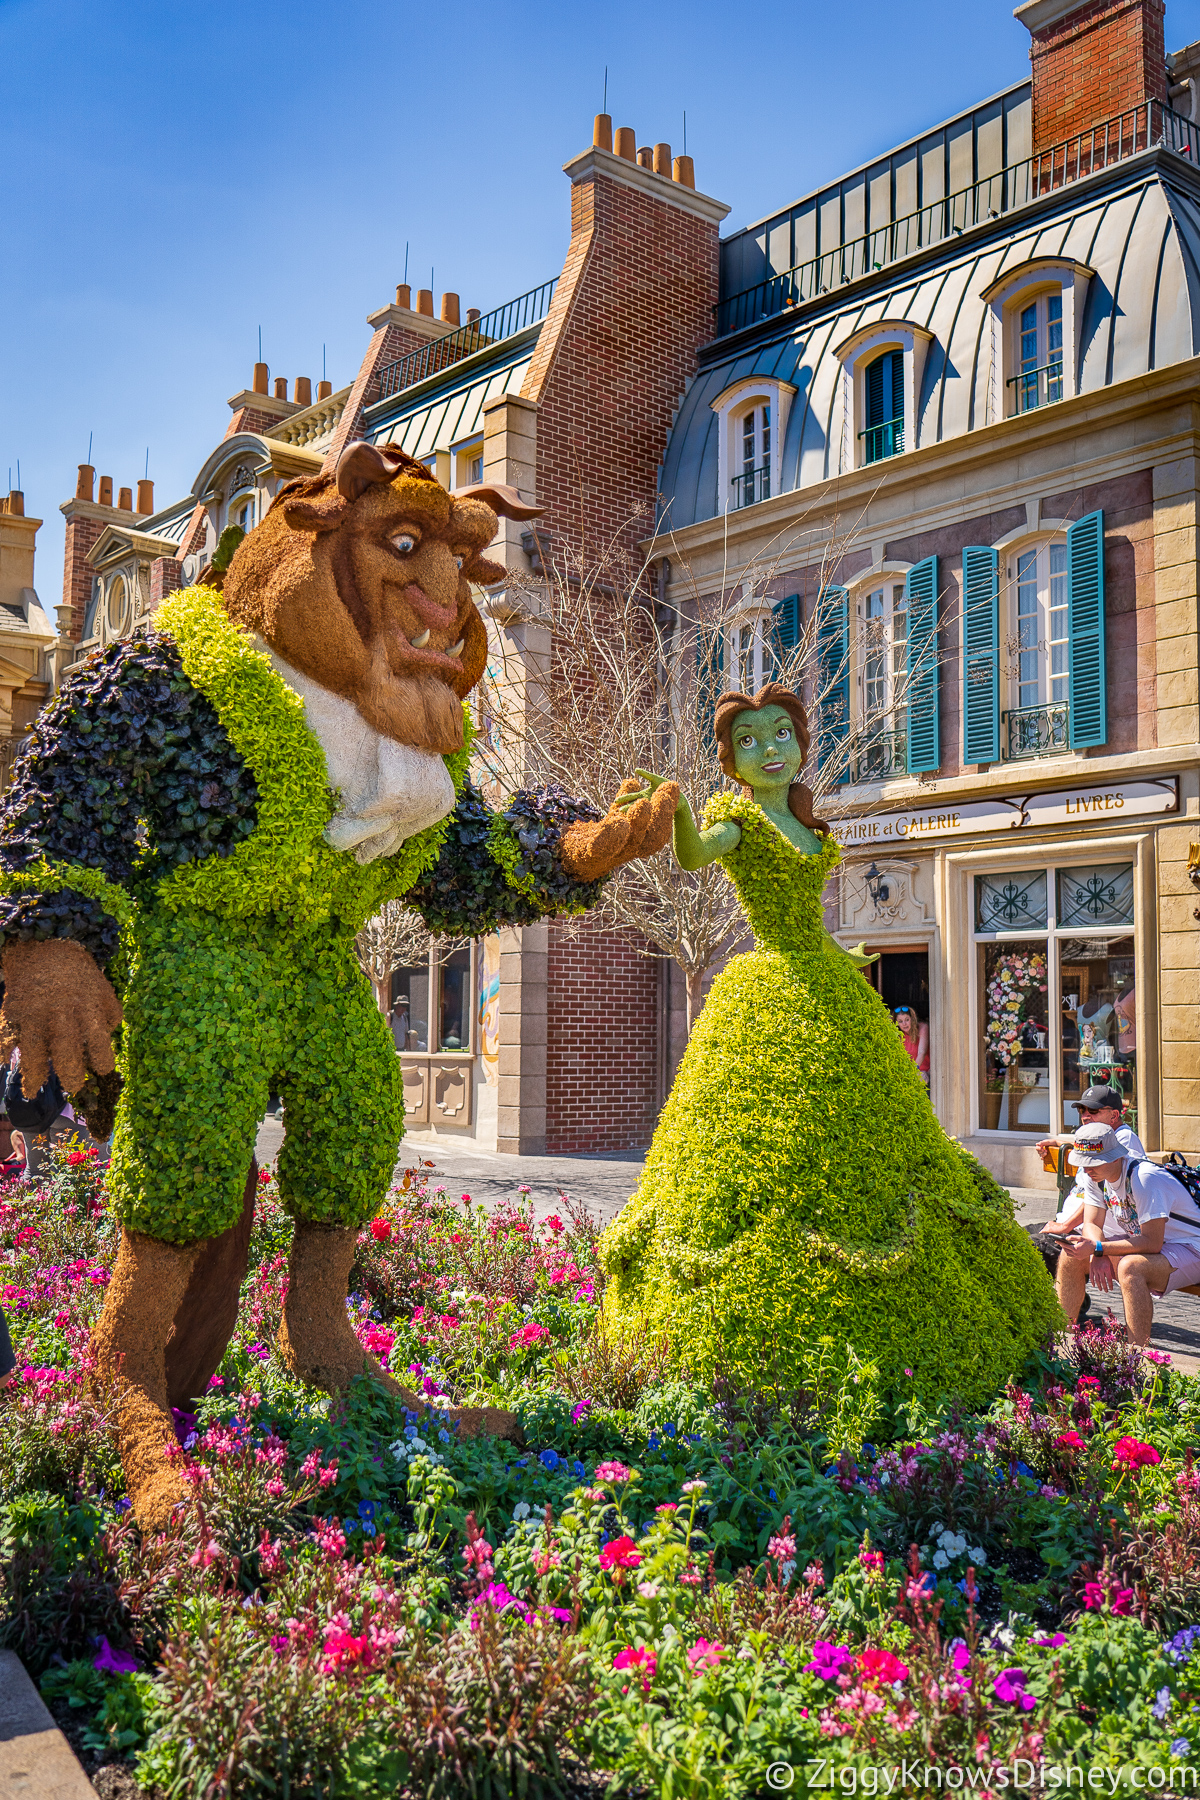 Belle and The Beast Topiaries 2022 EPCOT Flower and Garden Festival